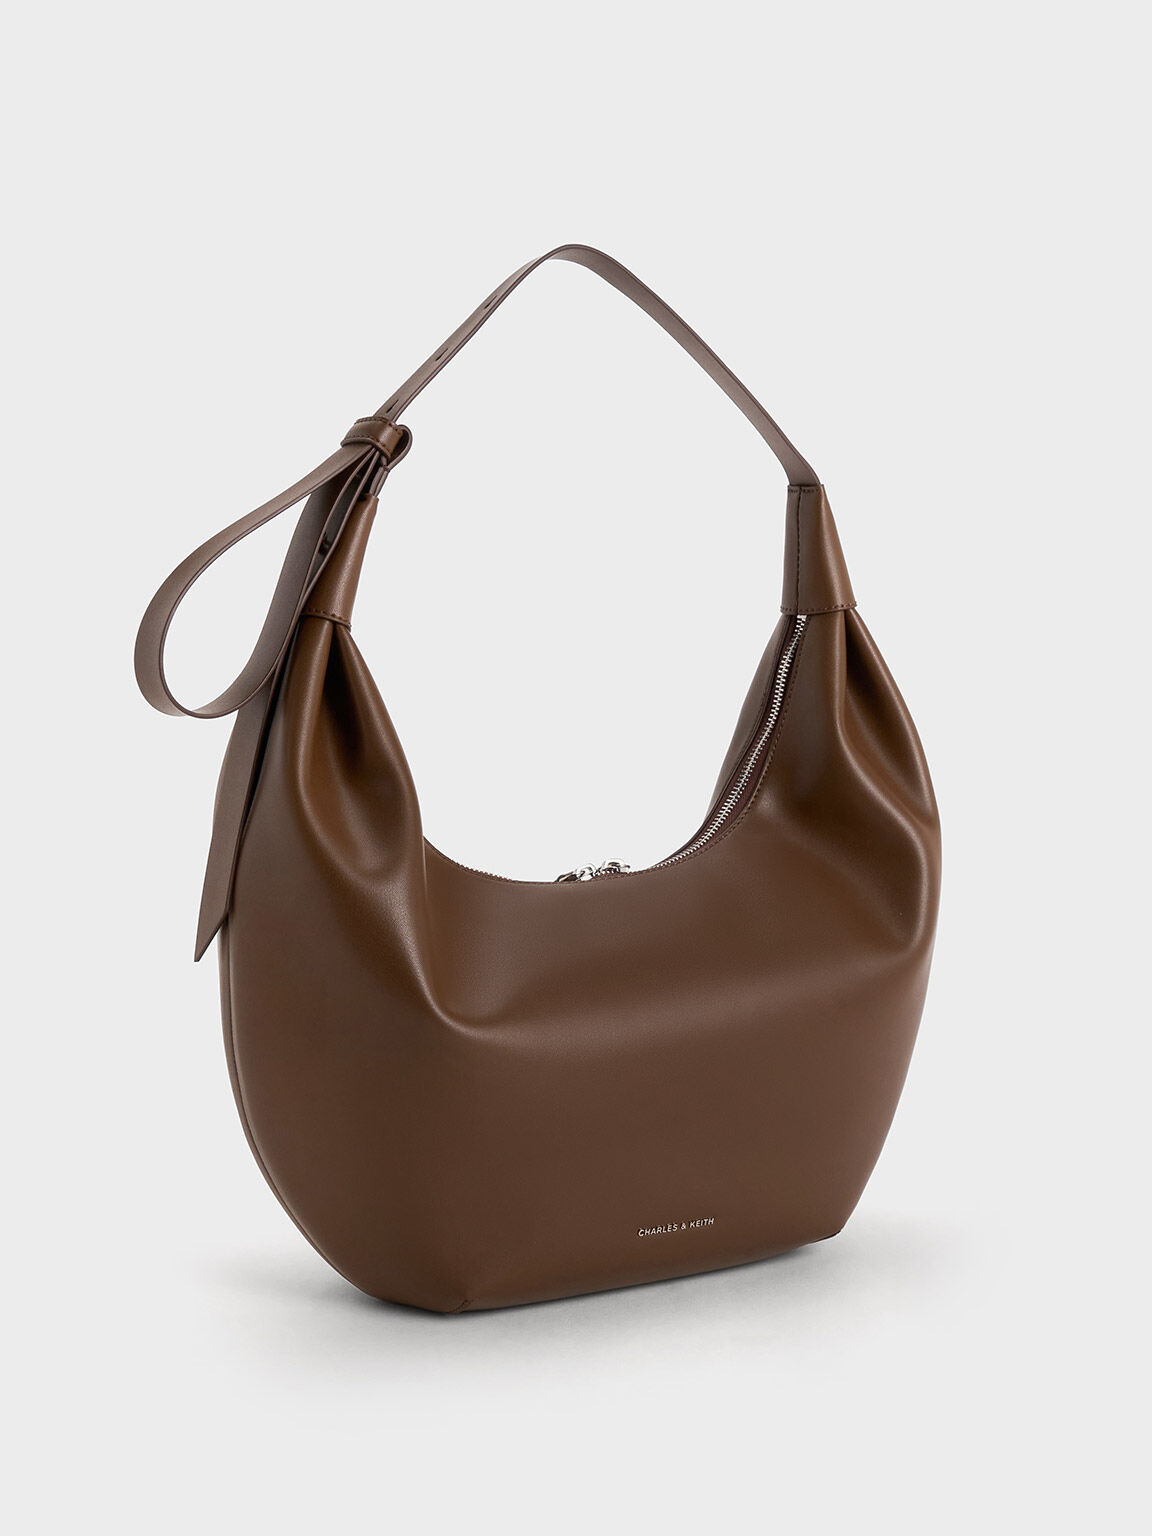 Leather Hobo Handbag - For Horse Lovers and a Western Lifestyle